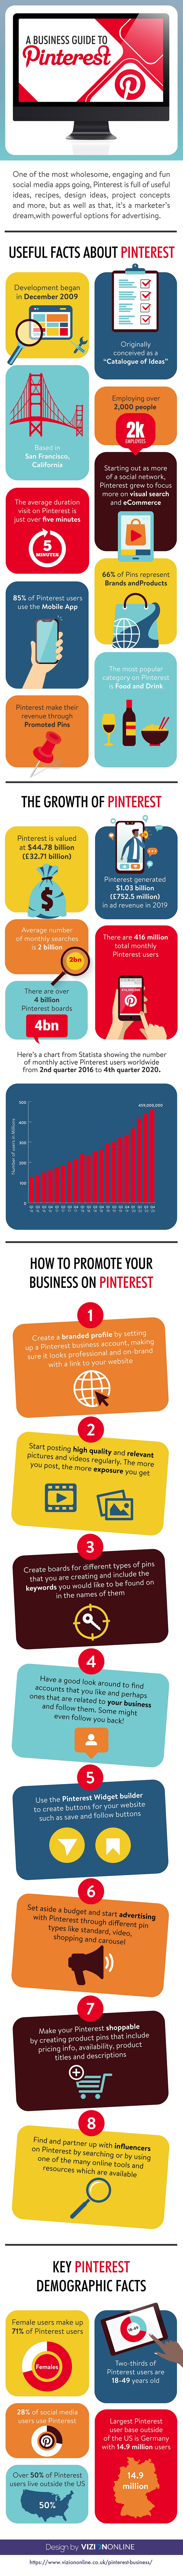 a business guide to pinterest infographic